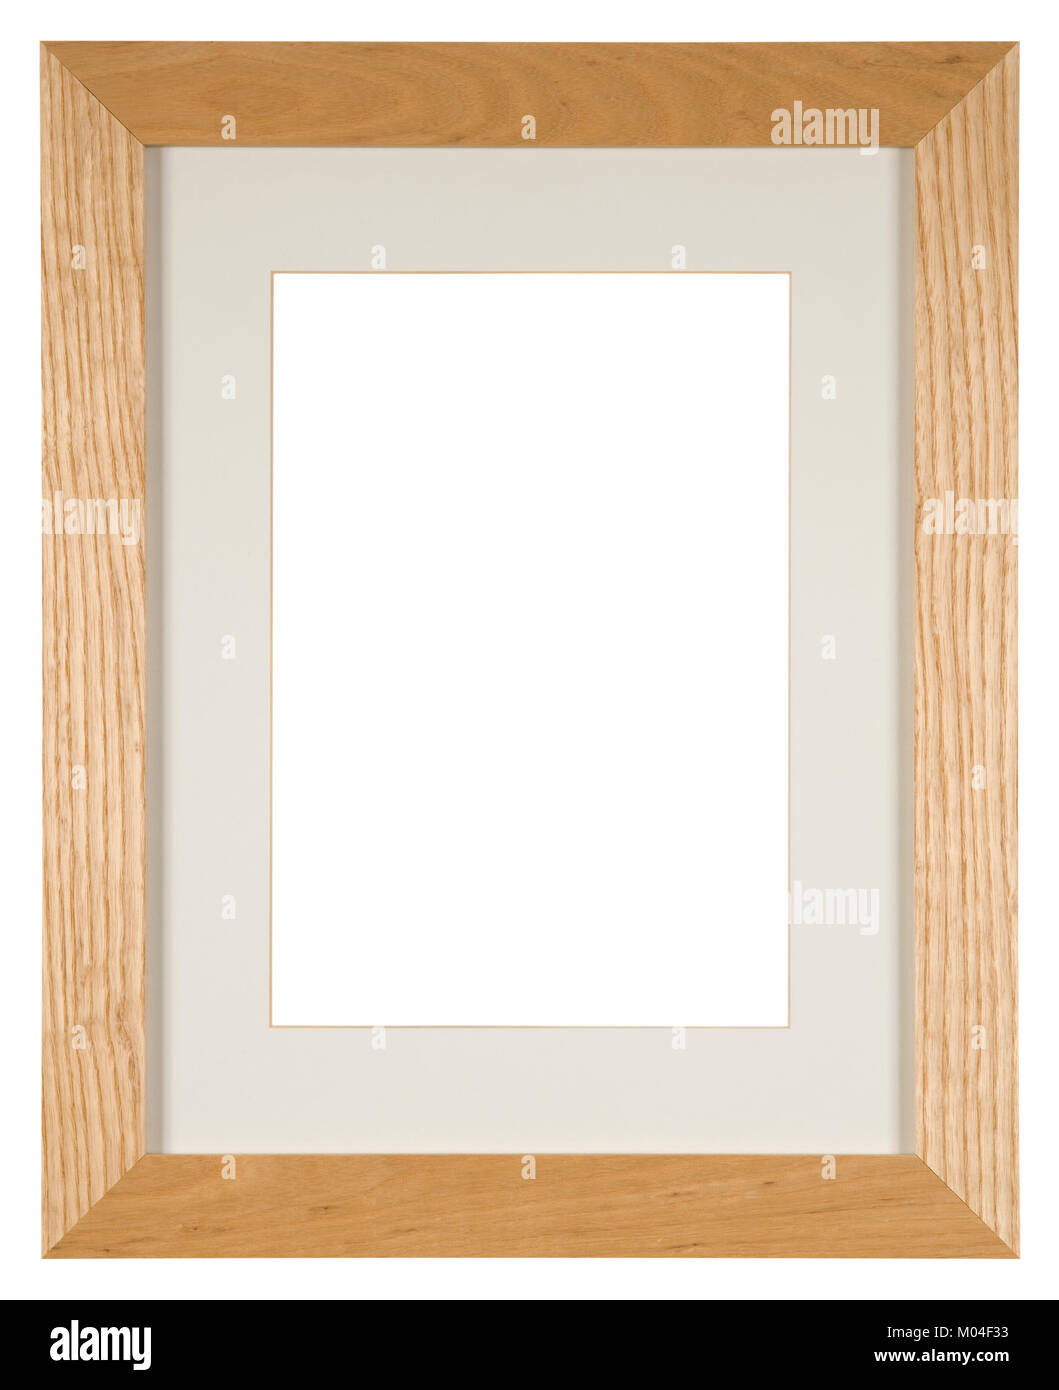 Empty picture frame isolated on white, portrait format with mount in light oak wood Stock Photo